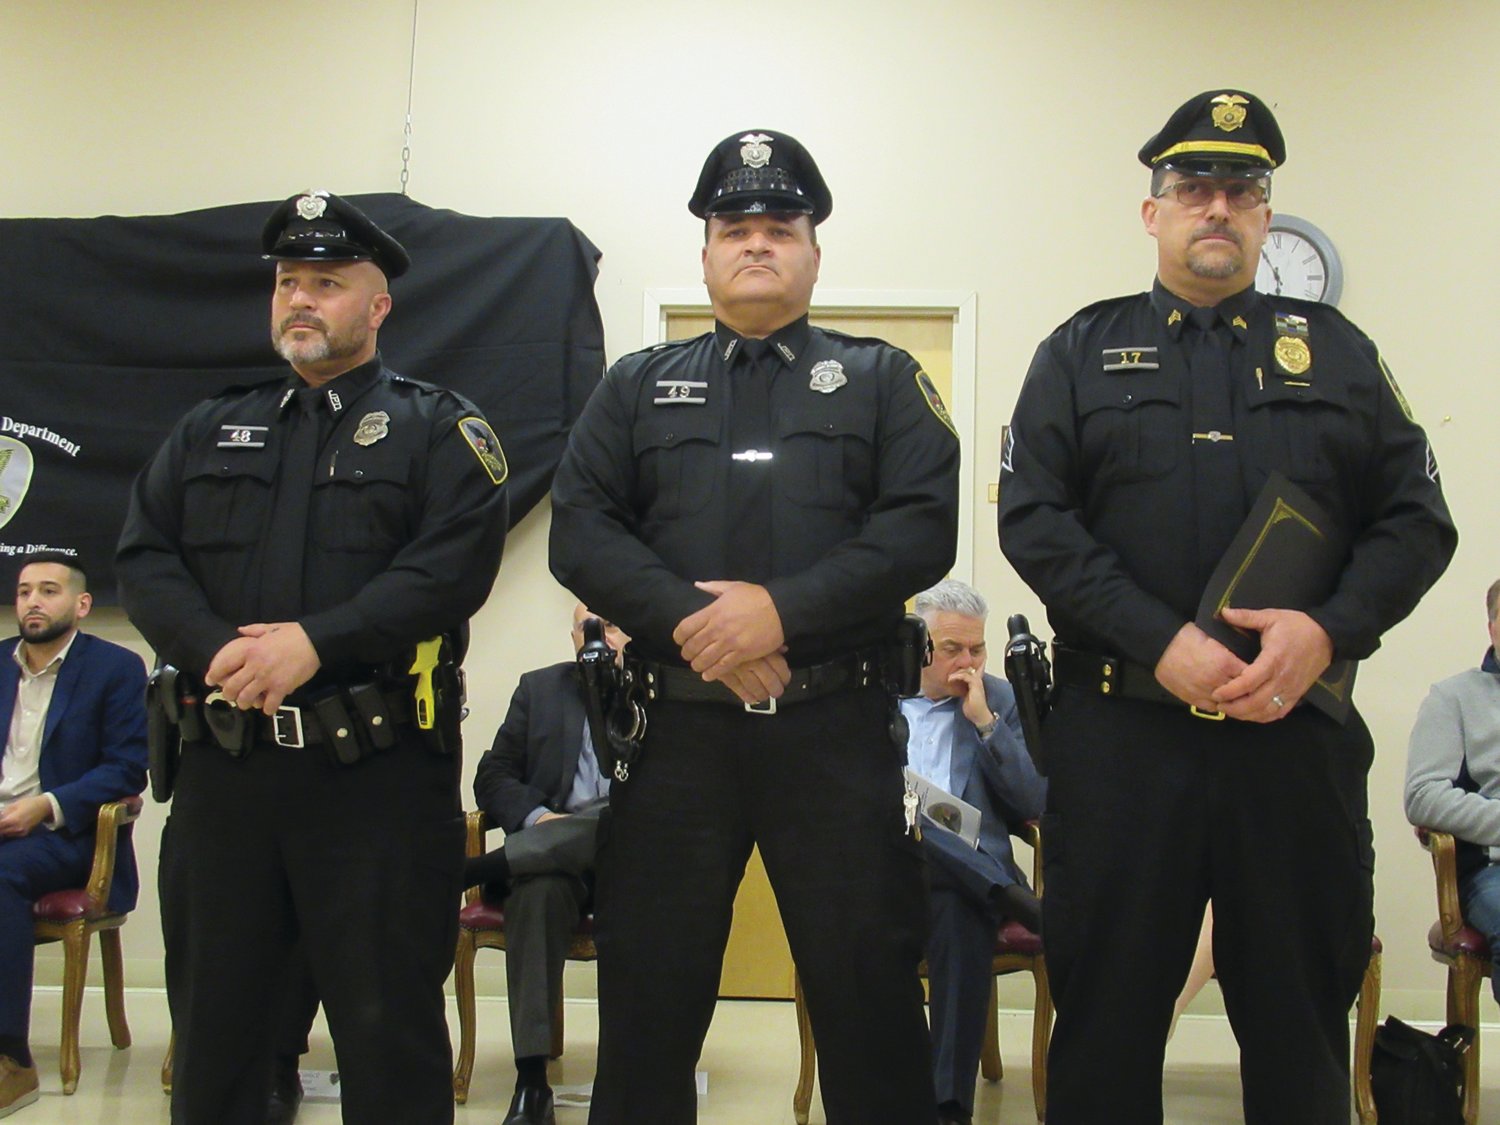 TERRIFIC TRIBUTE: Those JPD officers who were honored with the Letter of Recognition Awards were Patrolmen Mario Menella and Edward Gonsalves and Sgt. Joseph Scichilone.